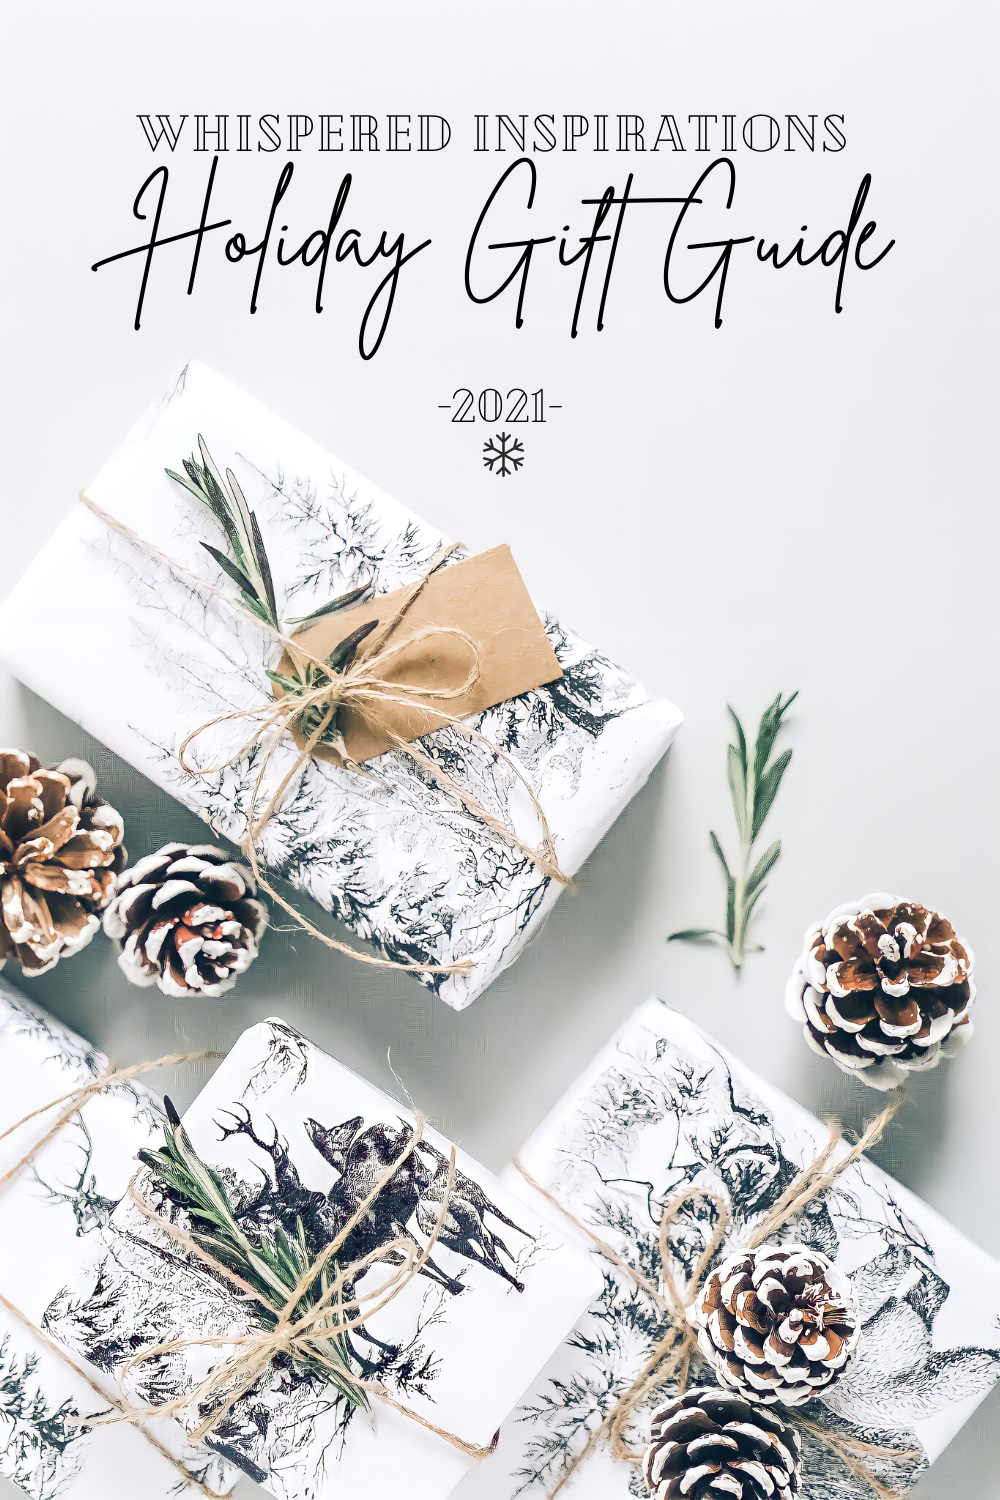 Beautiful gifts are wrapped in black and white wrapping with printed landscape. They are adorned with acorns and greenery and tied with twine. A banner reads, "Whispered Inspirations, Holiday Gift Guide, 2021.